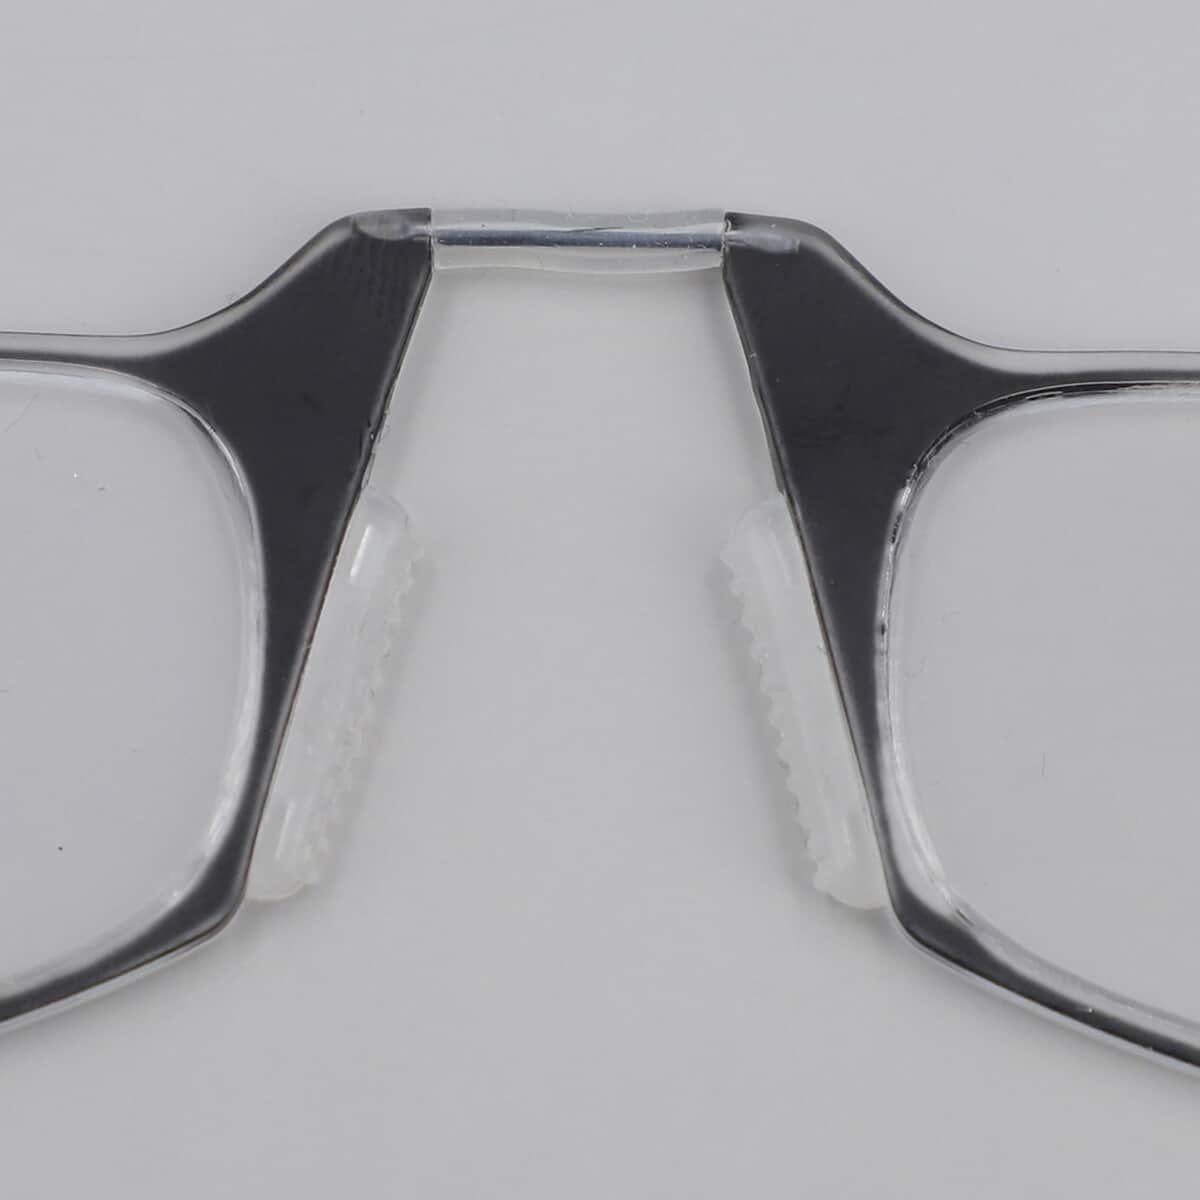 Feather Light Reading Glasses with a Flat Case - Black (Degree 1.0) image number 4